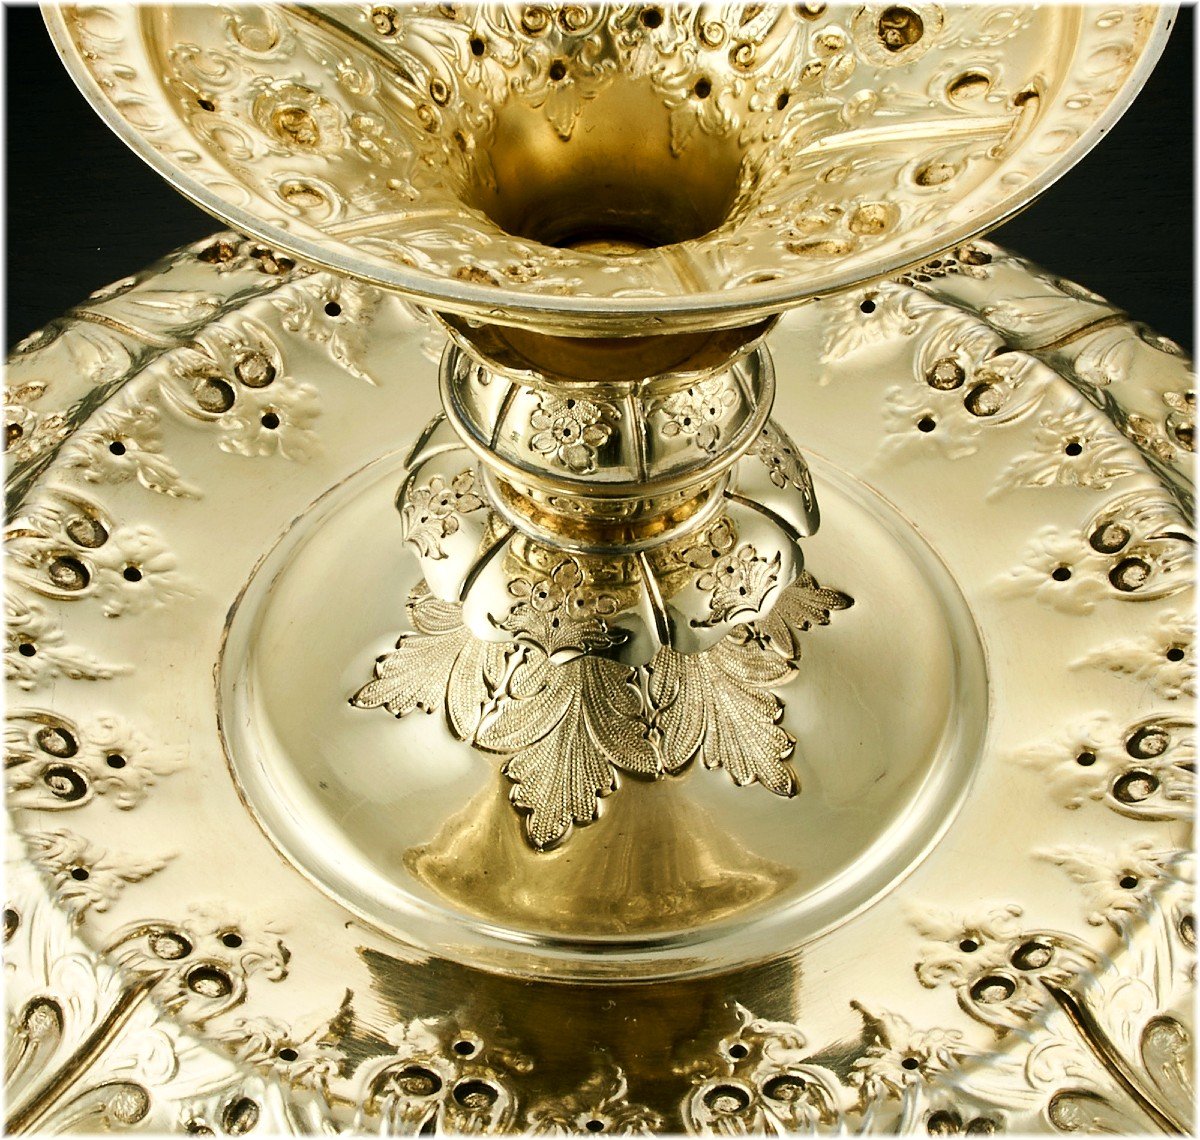 Martin Hall : Gilt Sterling Silver Tazza / Centerpiece Dish London 1883 - Flowers, Fruits-photo-1